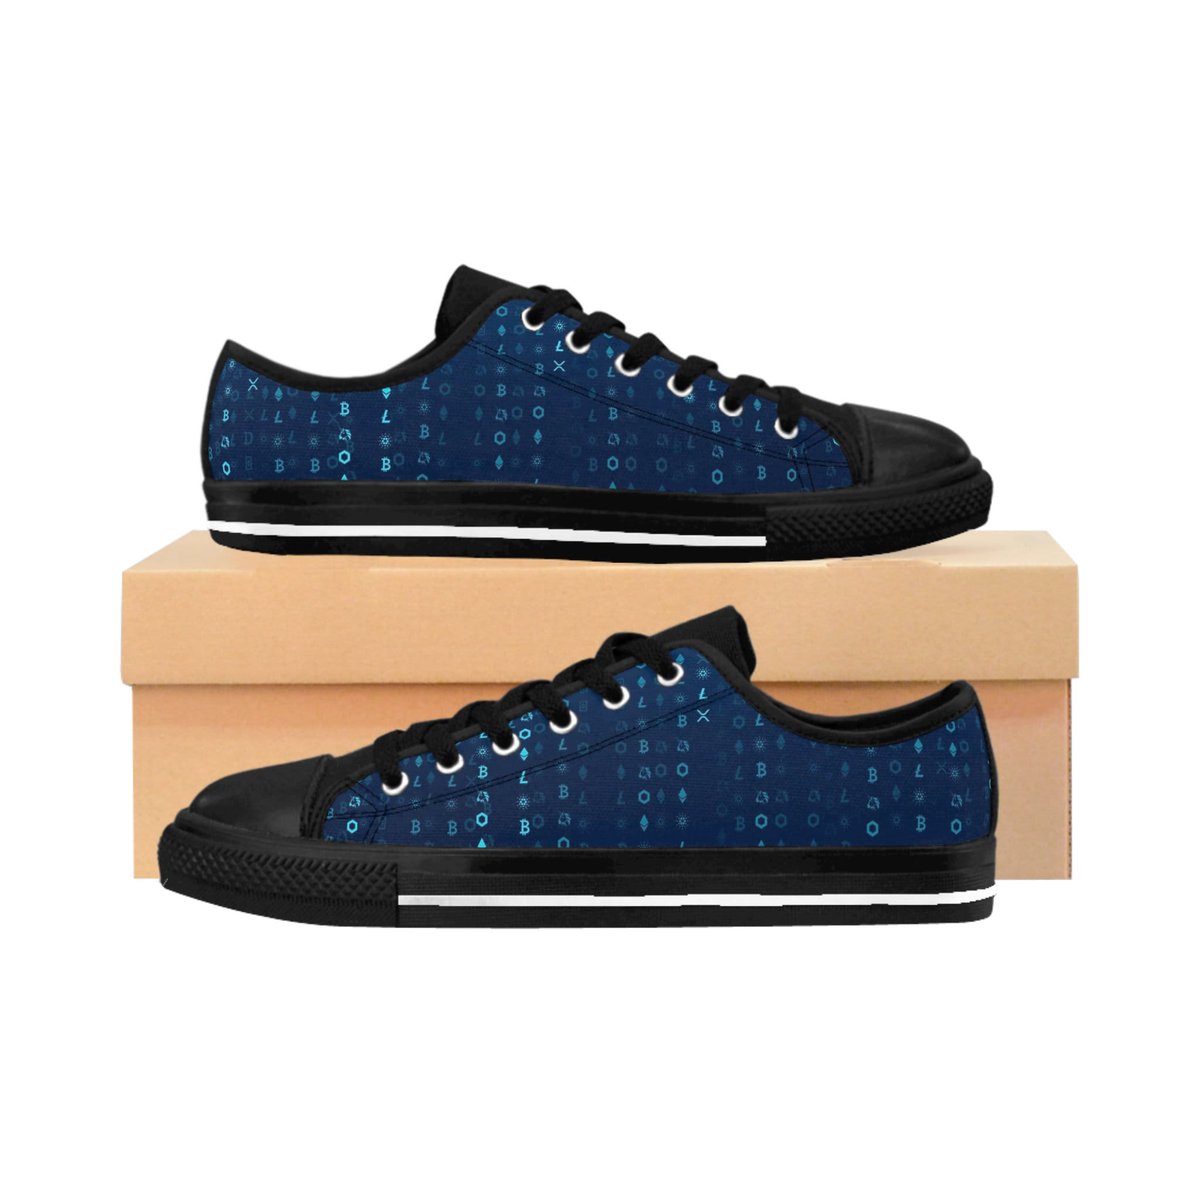 Excited to share the latest addition to my #etsy shop: MEN'S CRYPTO Matrix SNEAKERS - Crypto Men's Sneakers - Cryptocurrency Men's Sneakers - Men's Athletic Sneakers - Sneakers  etsy.me/3XbqalA #blue #black #menssneakers #menswalkingshoes #mensathleticshoes